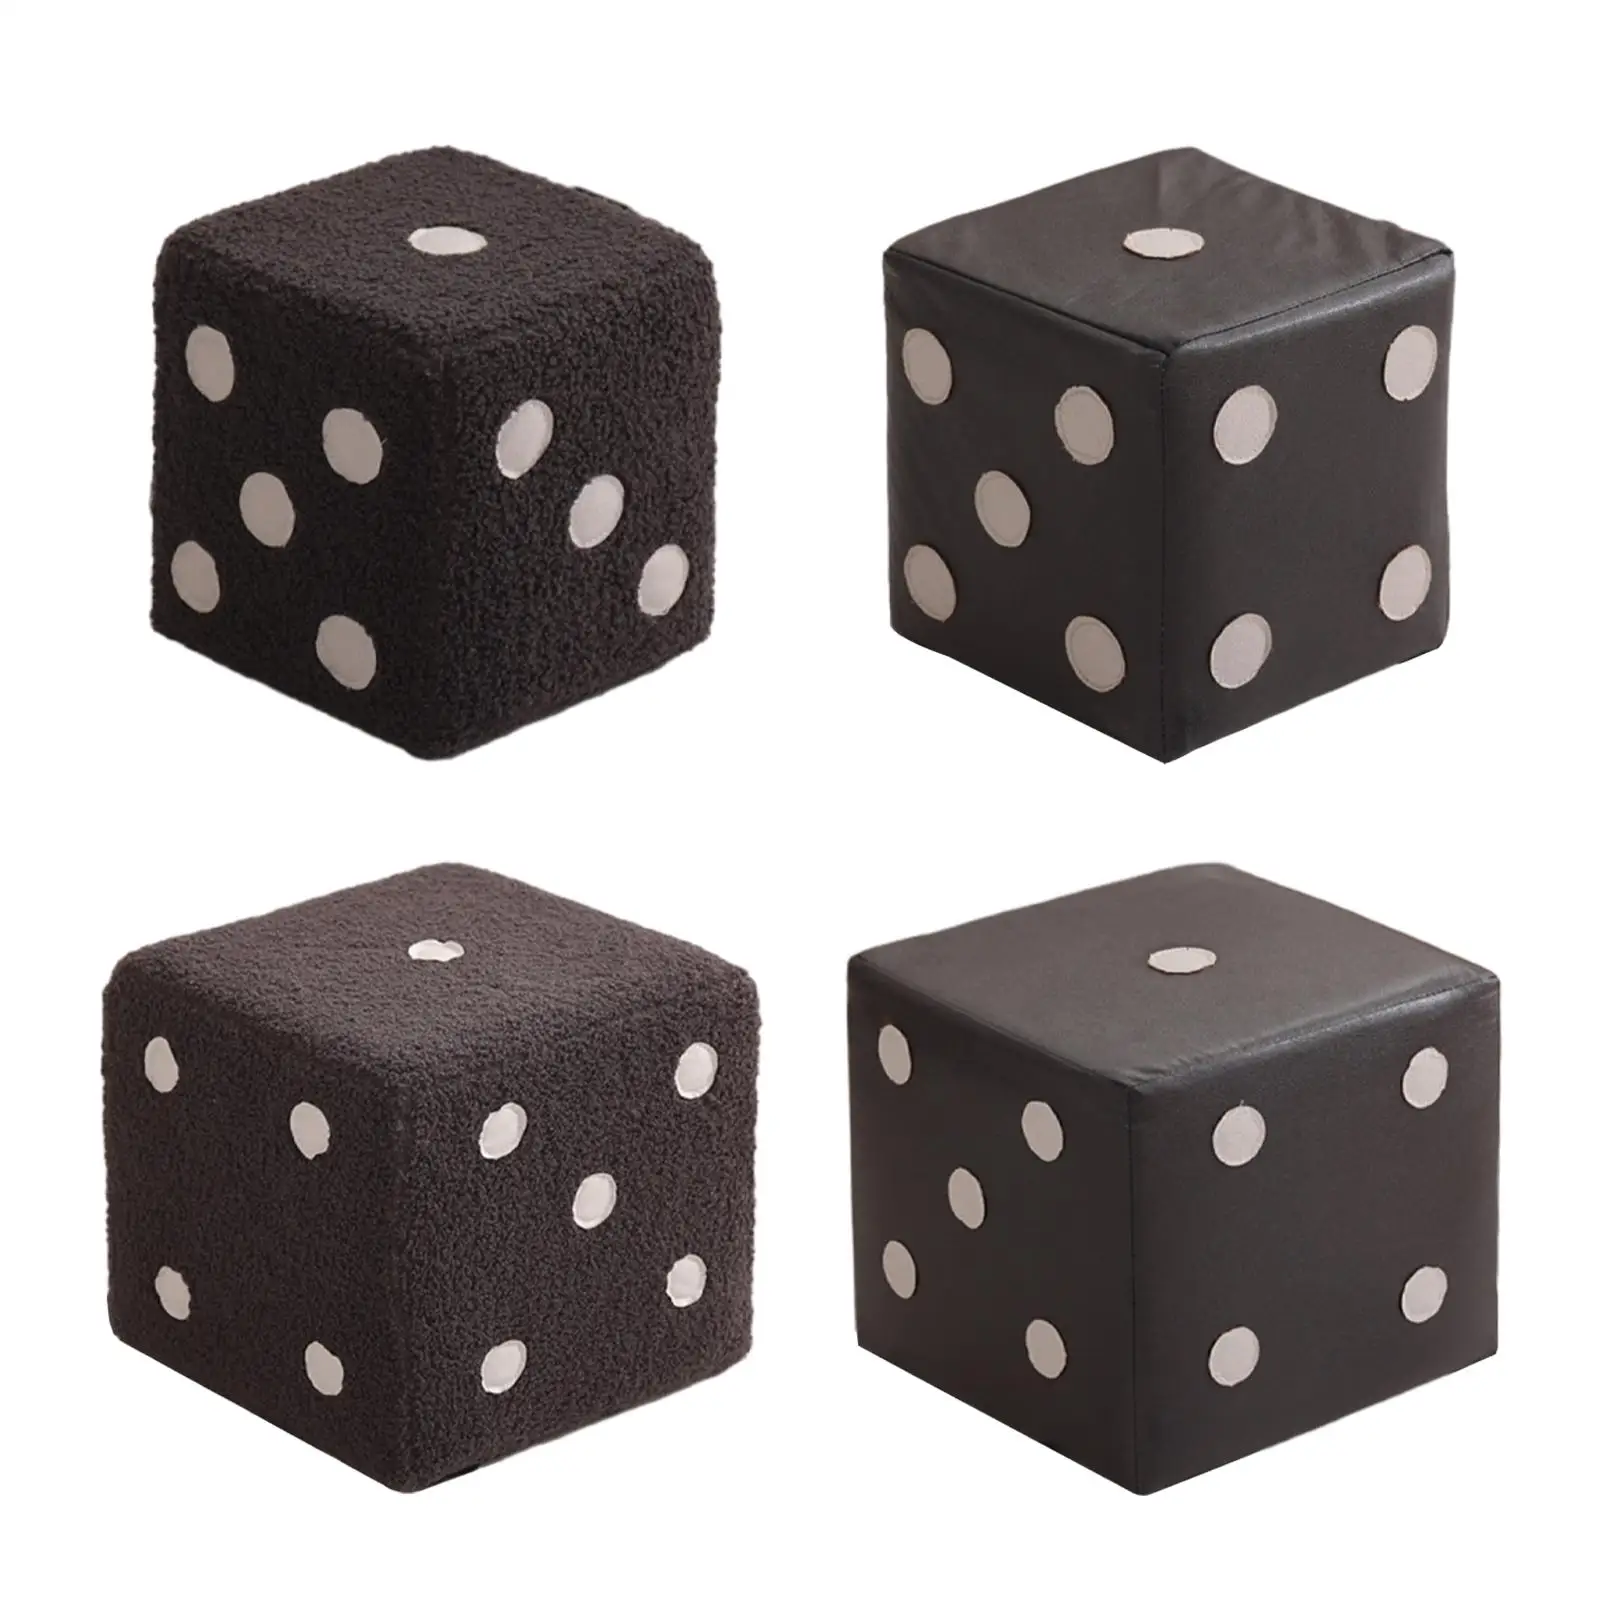 Small Footrest Unique Upholstered Stable Dice Patterns for Playroom Bedside